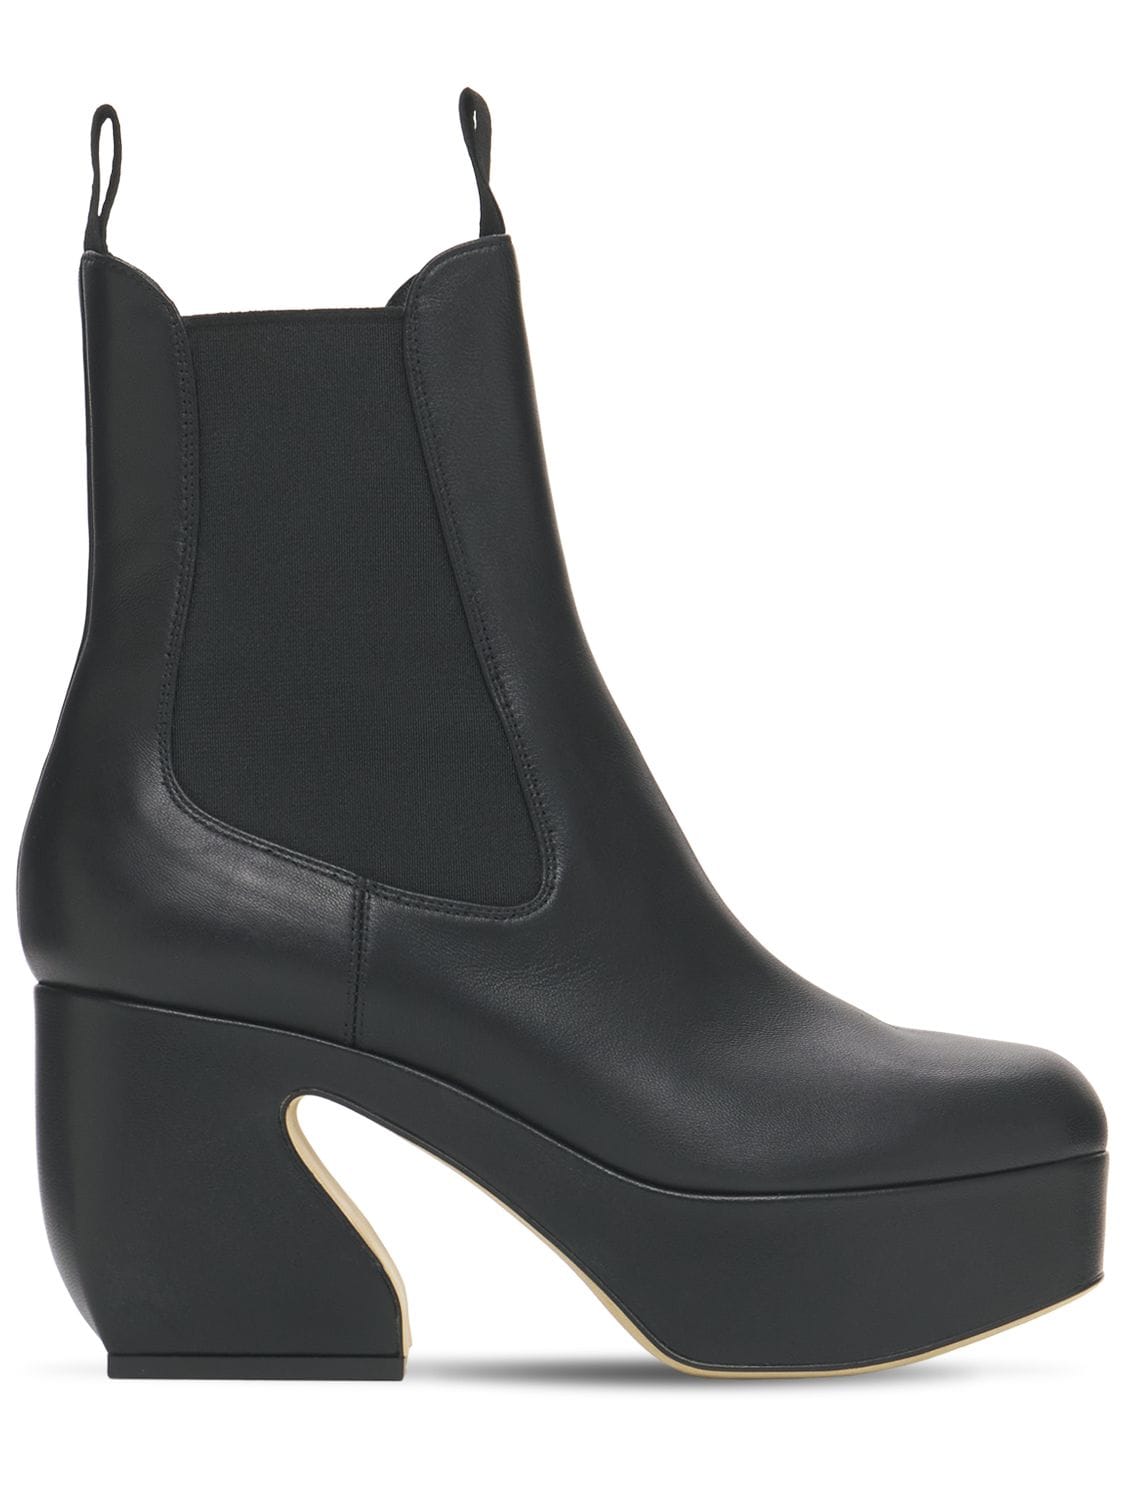 85mm Platform Leather Ankle Boots